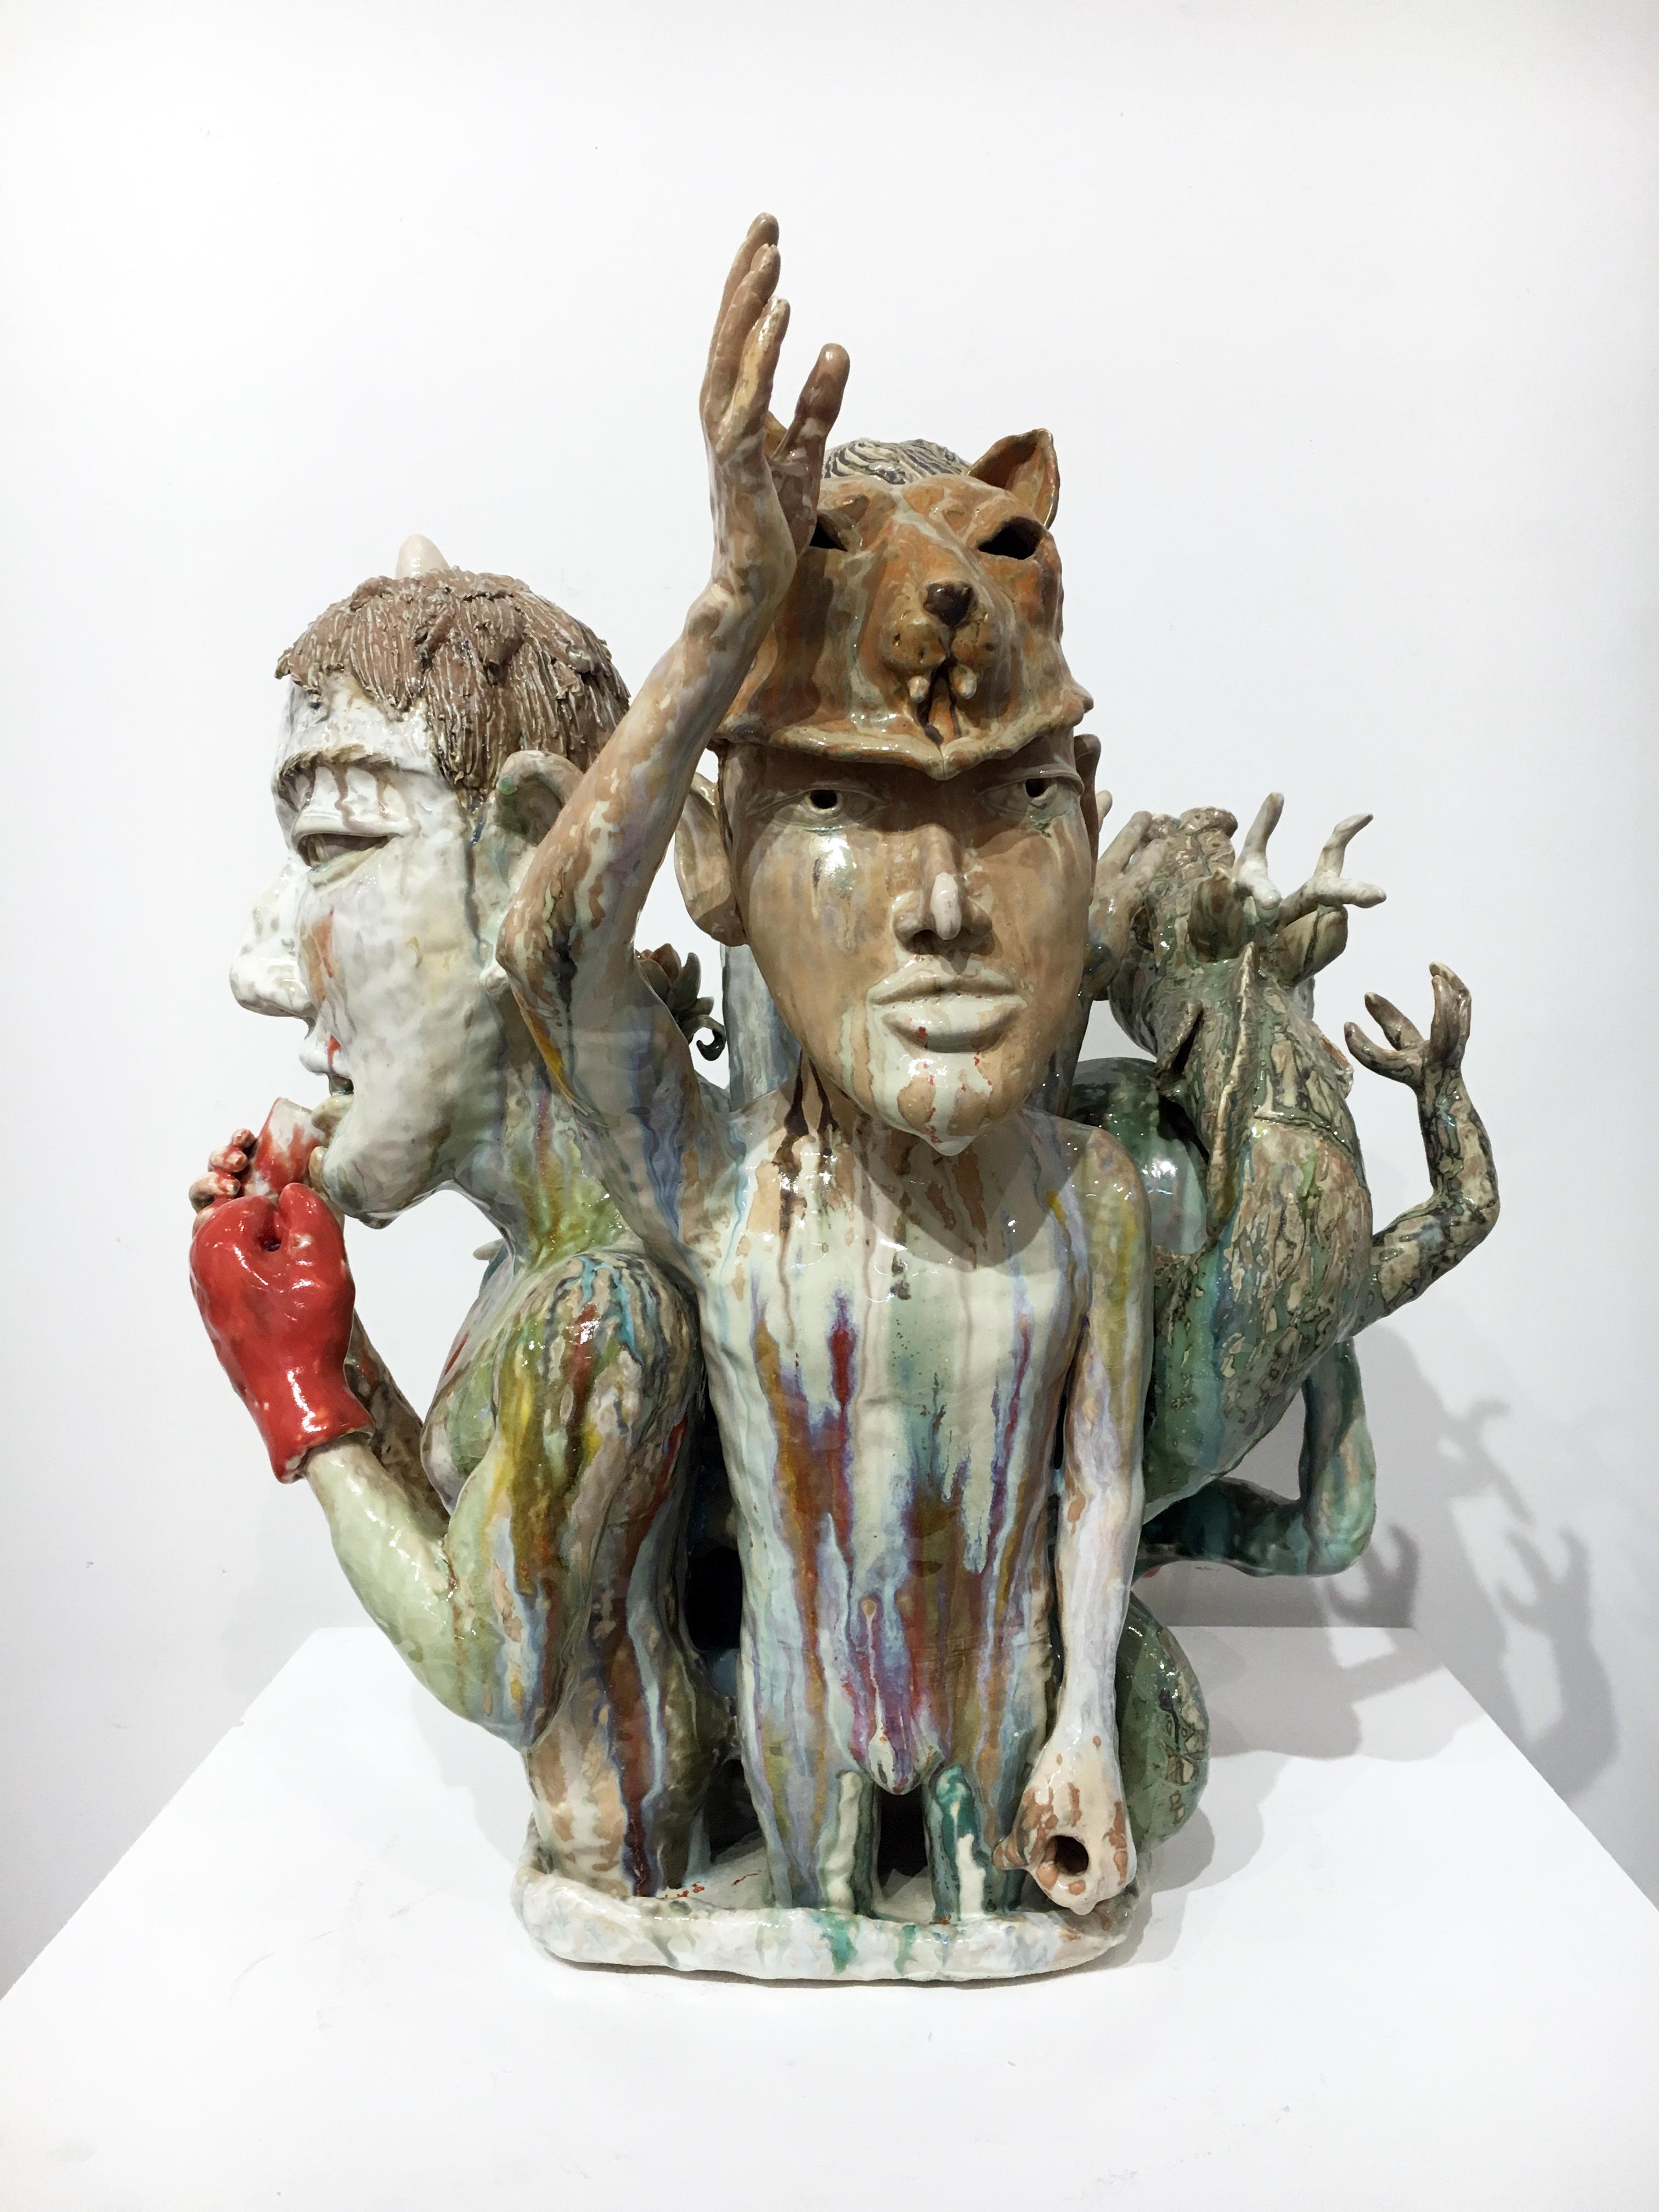 The ceramic sculptures of SunKoo Yuh are composed of tight groupings of various forms including plants, animals, fish, and human figures. While Korean art, Buddhism, and Confucian beliefs inform some aspects of his imagery, implied narratives that